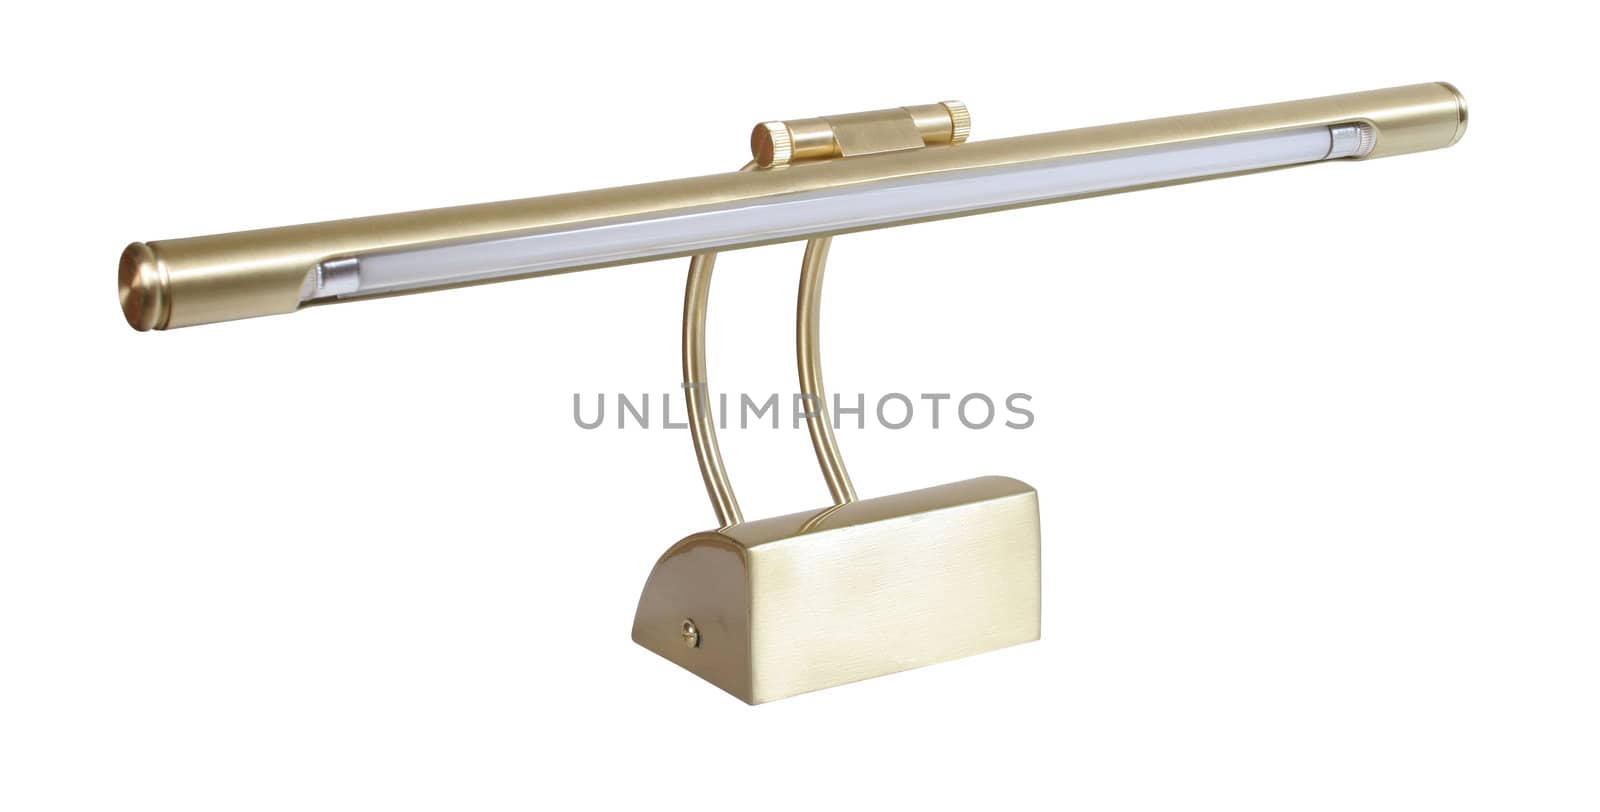 Lamp, isolated on a white background. File includes clipping path for easy background removing